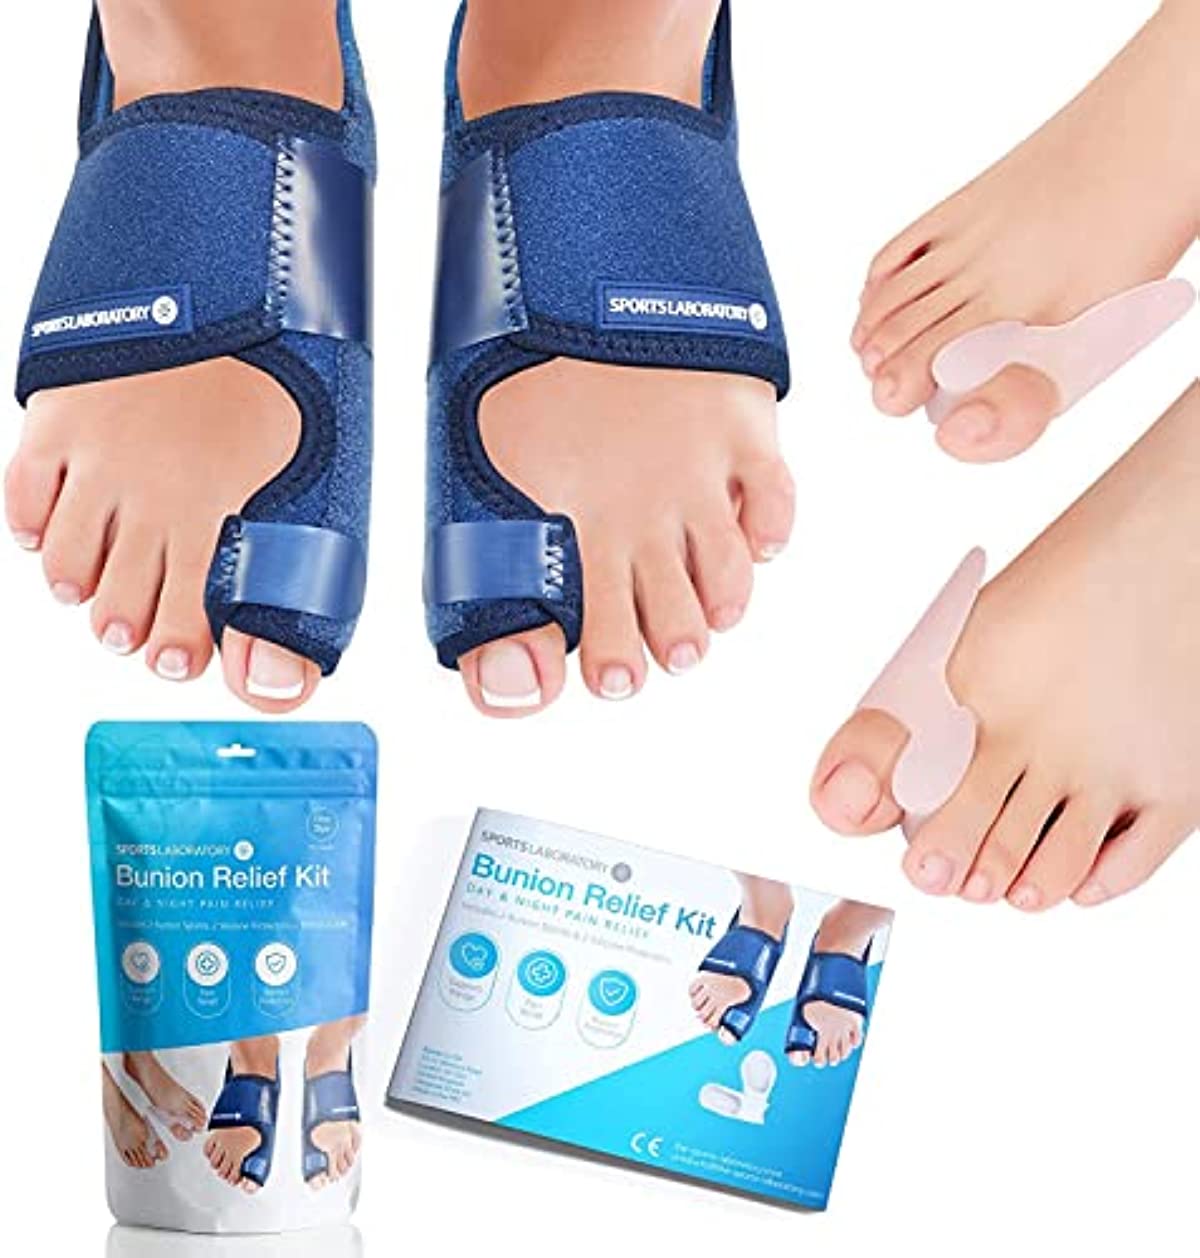 Sports Laboratory Bunion Corrector for Women and Men - Orthopedic Bunion Splints, Big Toe Straighteners and Bunion Relief Guide - Day and Night - Adjustable Size